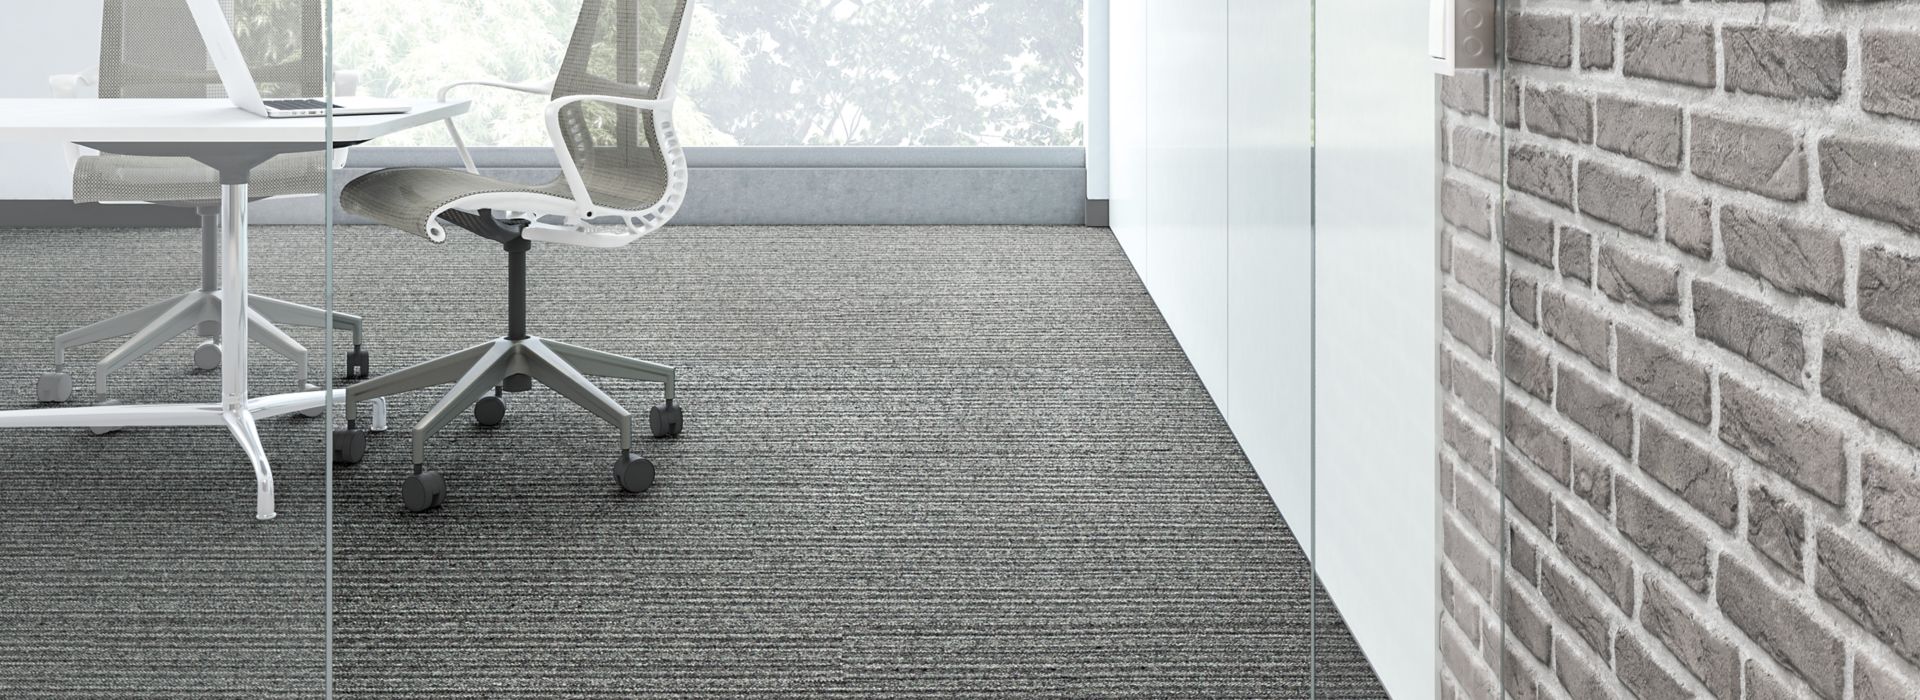 Interface WW865 plank carpet tile shown at a conference room entrance  image number 1